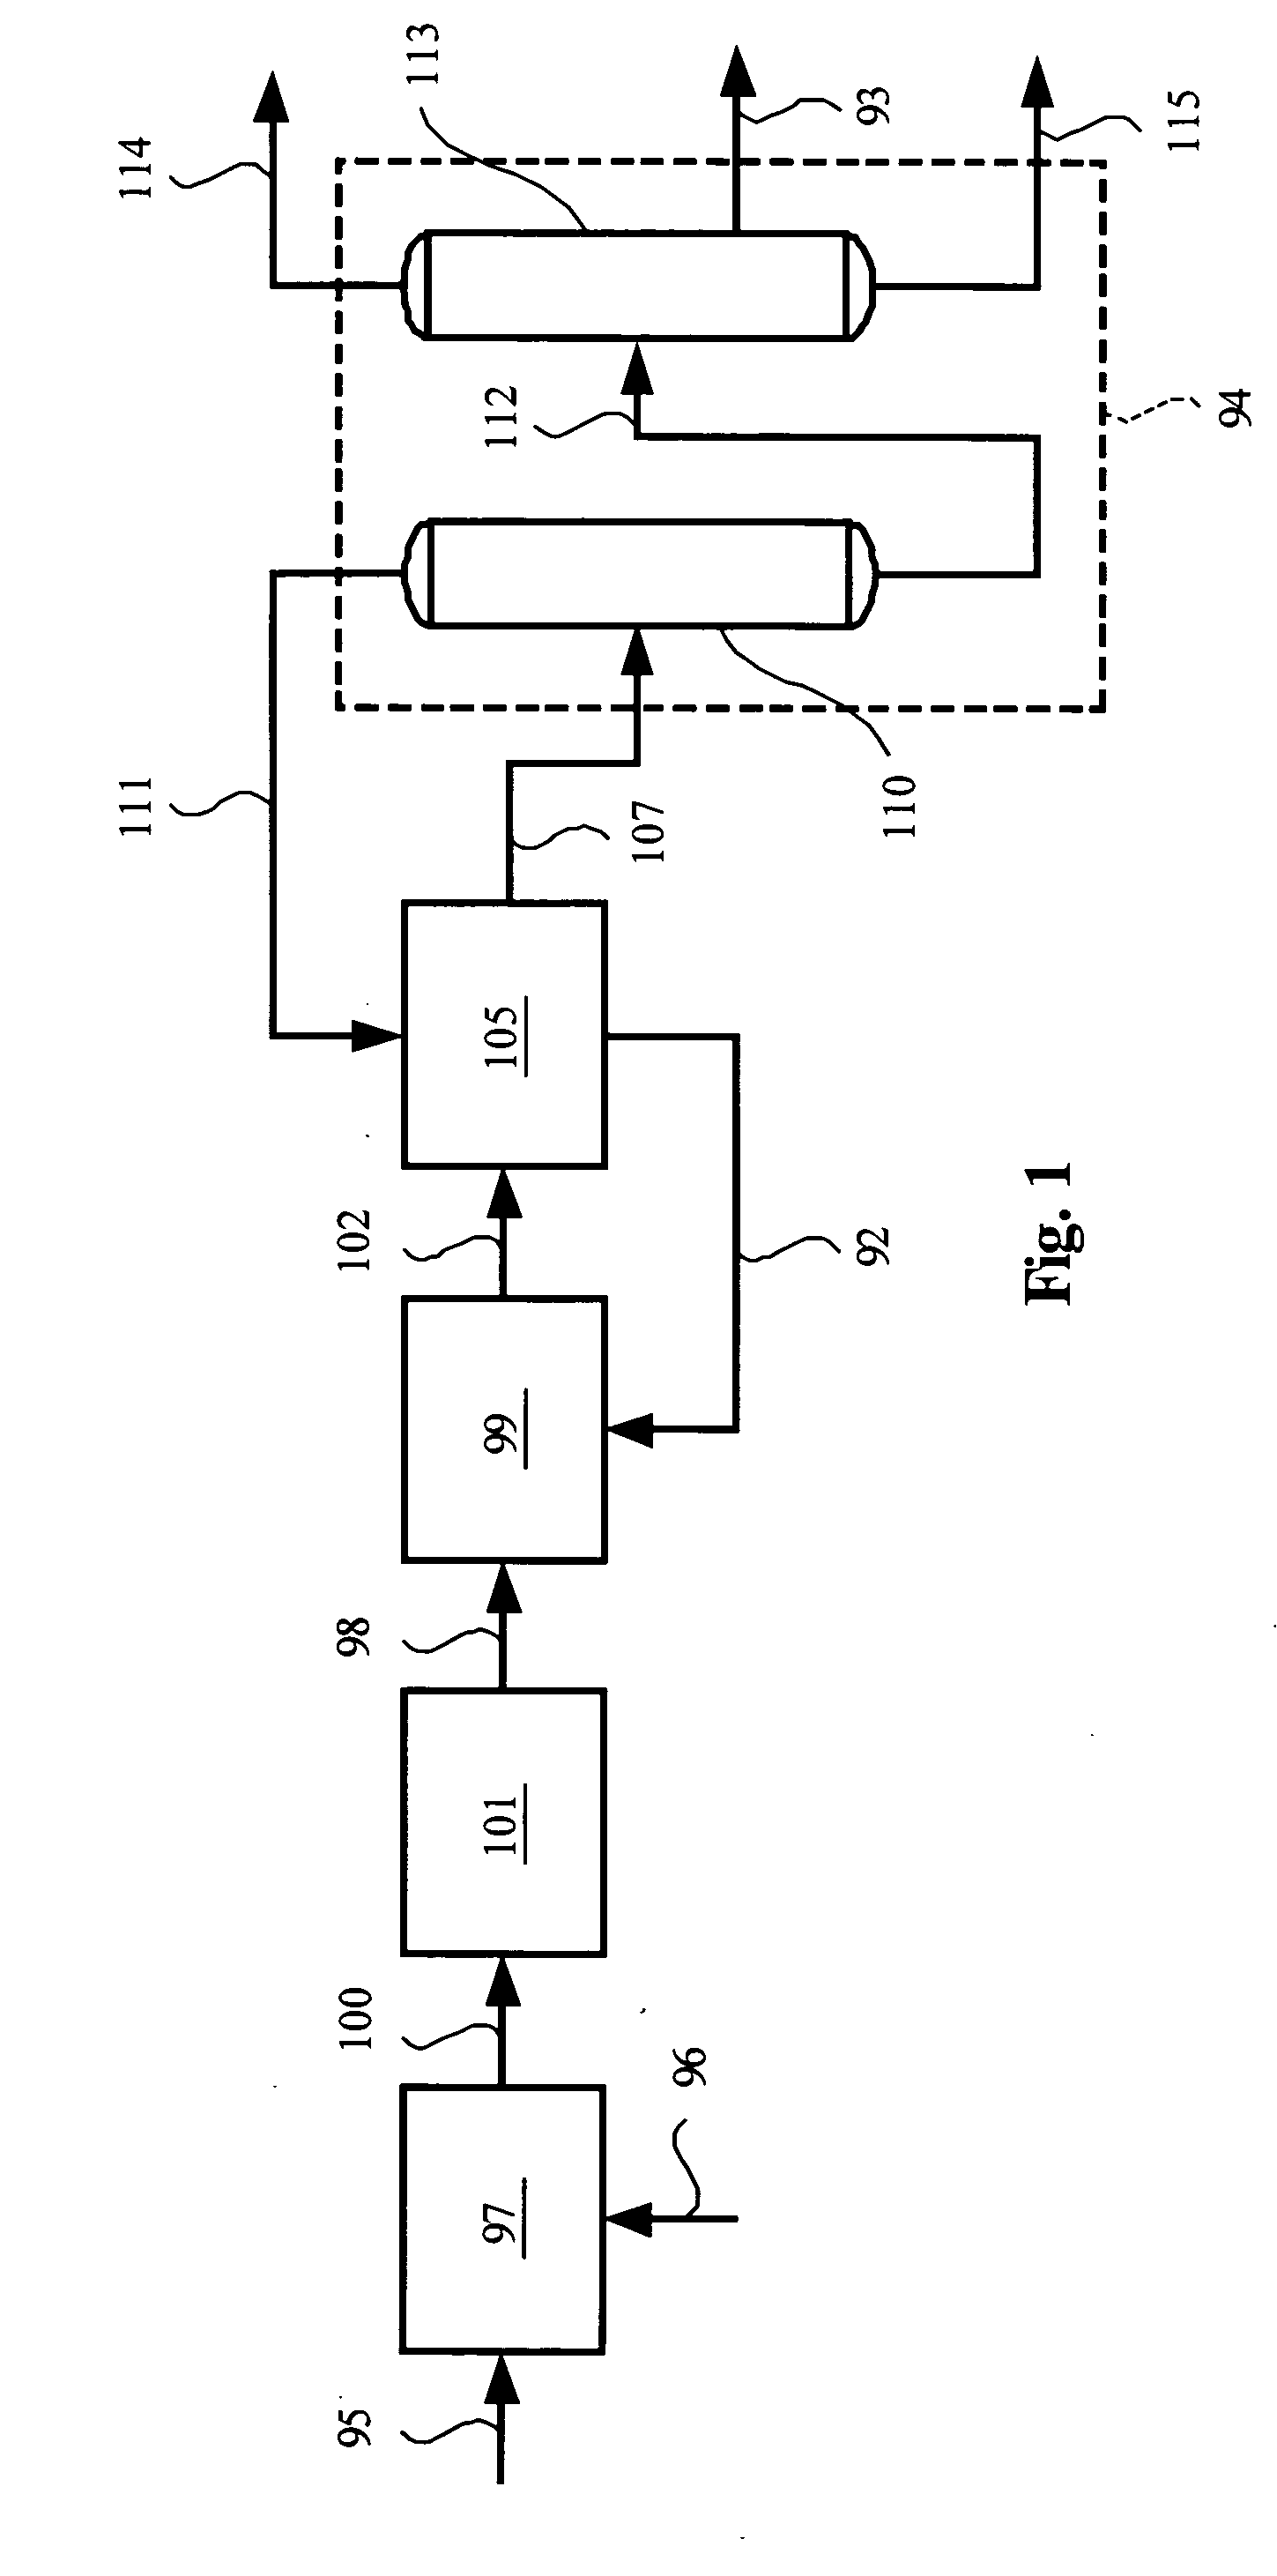 Methanol and ethanol production for an oxygenate to olefin reaction system